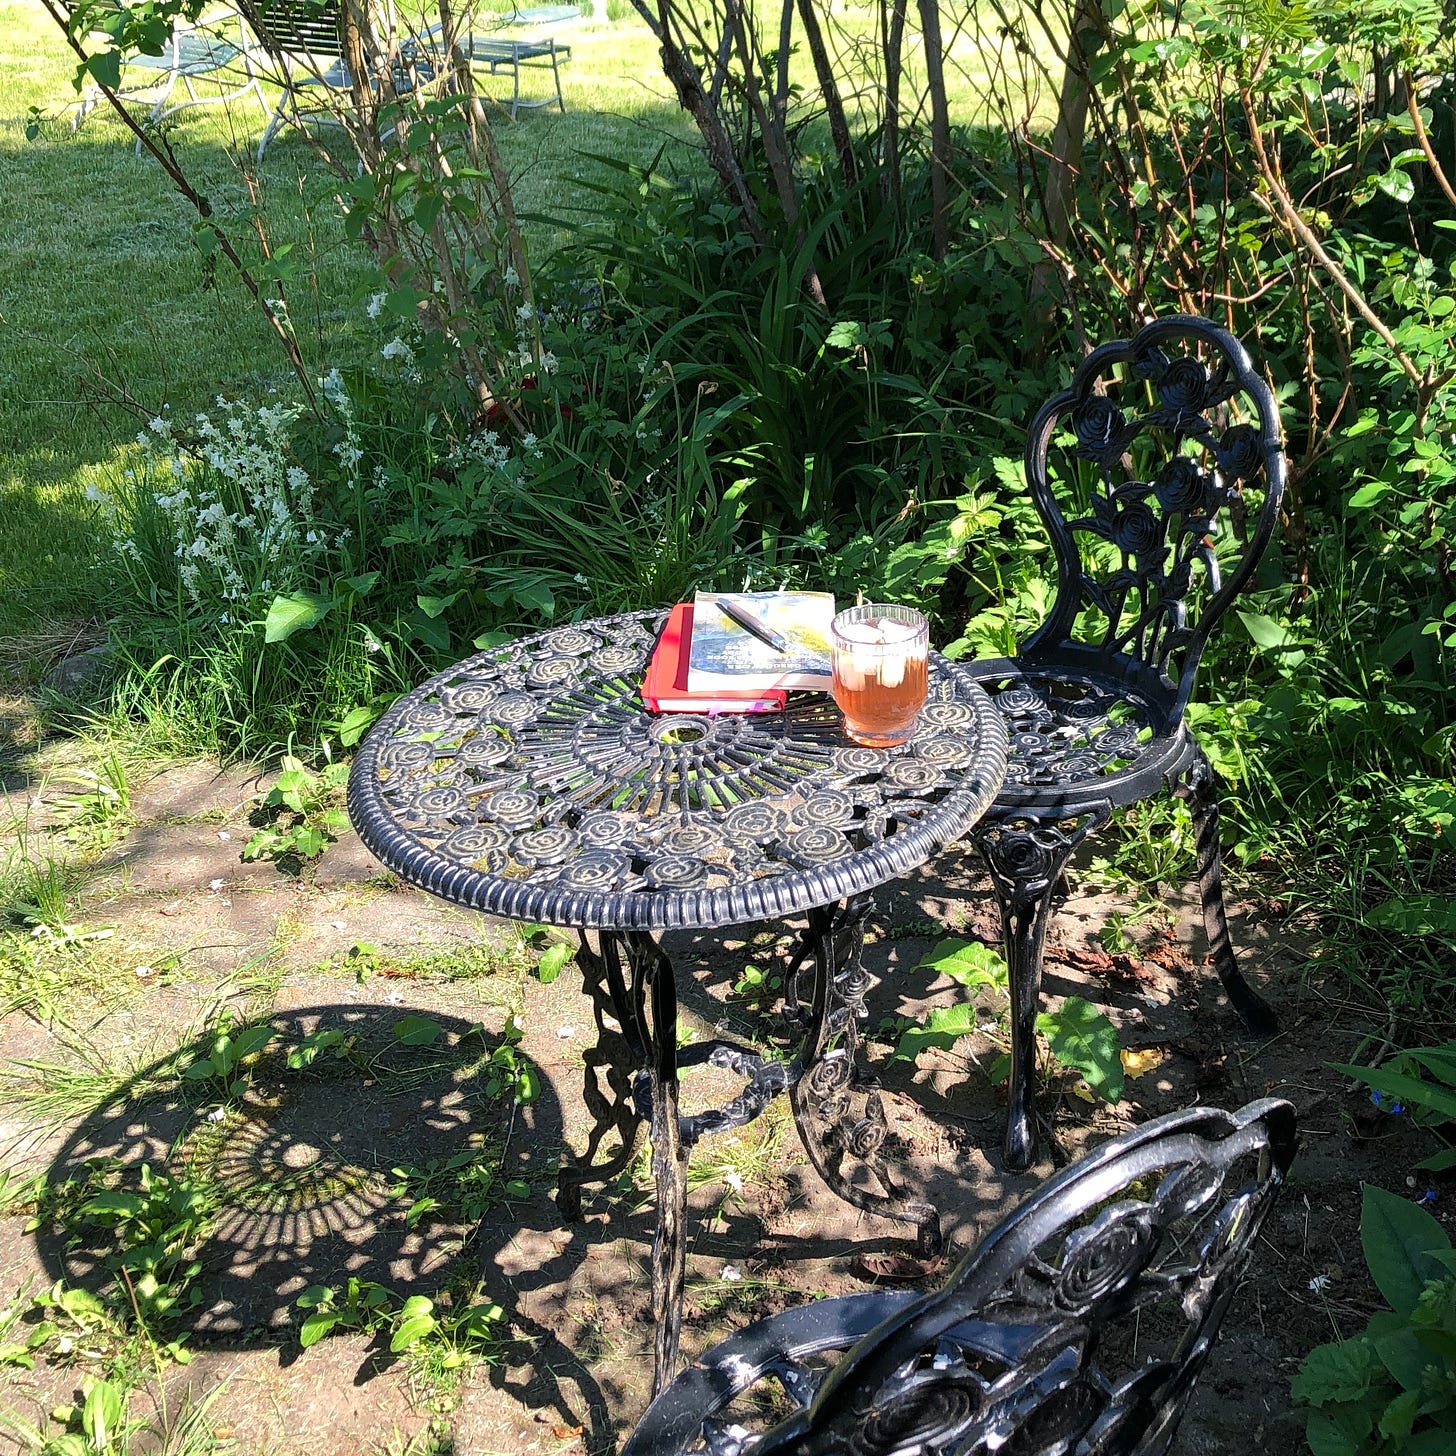 Black café-style metal chairs and table, holding book, notebook, pen, and iced tea, in a clearing surrounded by greenery.